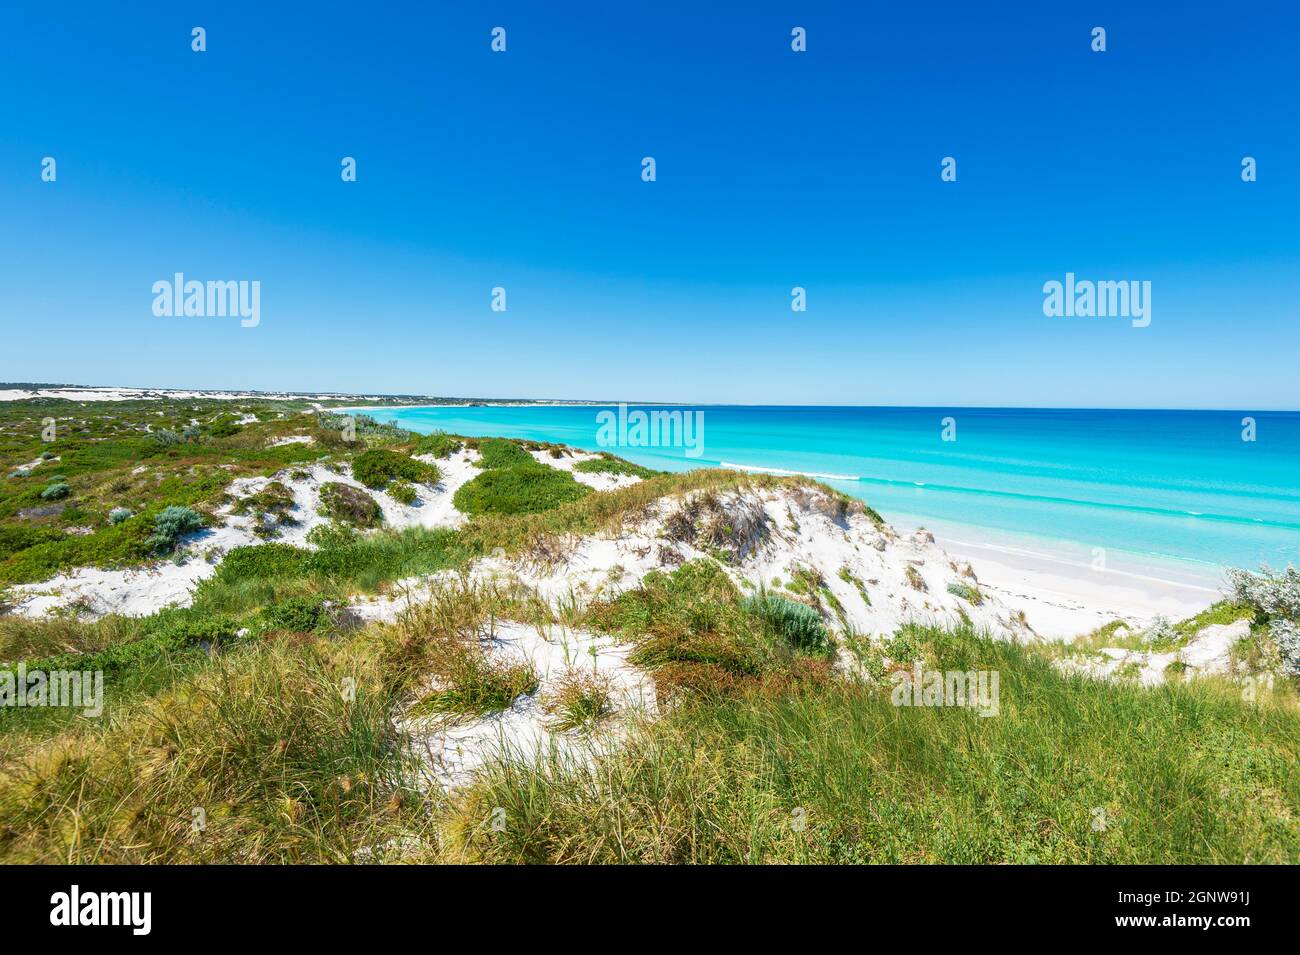 Spectacular view of white sand dunes and turquoise waters of the Indian Ocean at Wedge, Western Australia, Australia Stock Photo